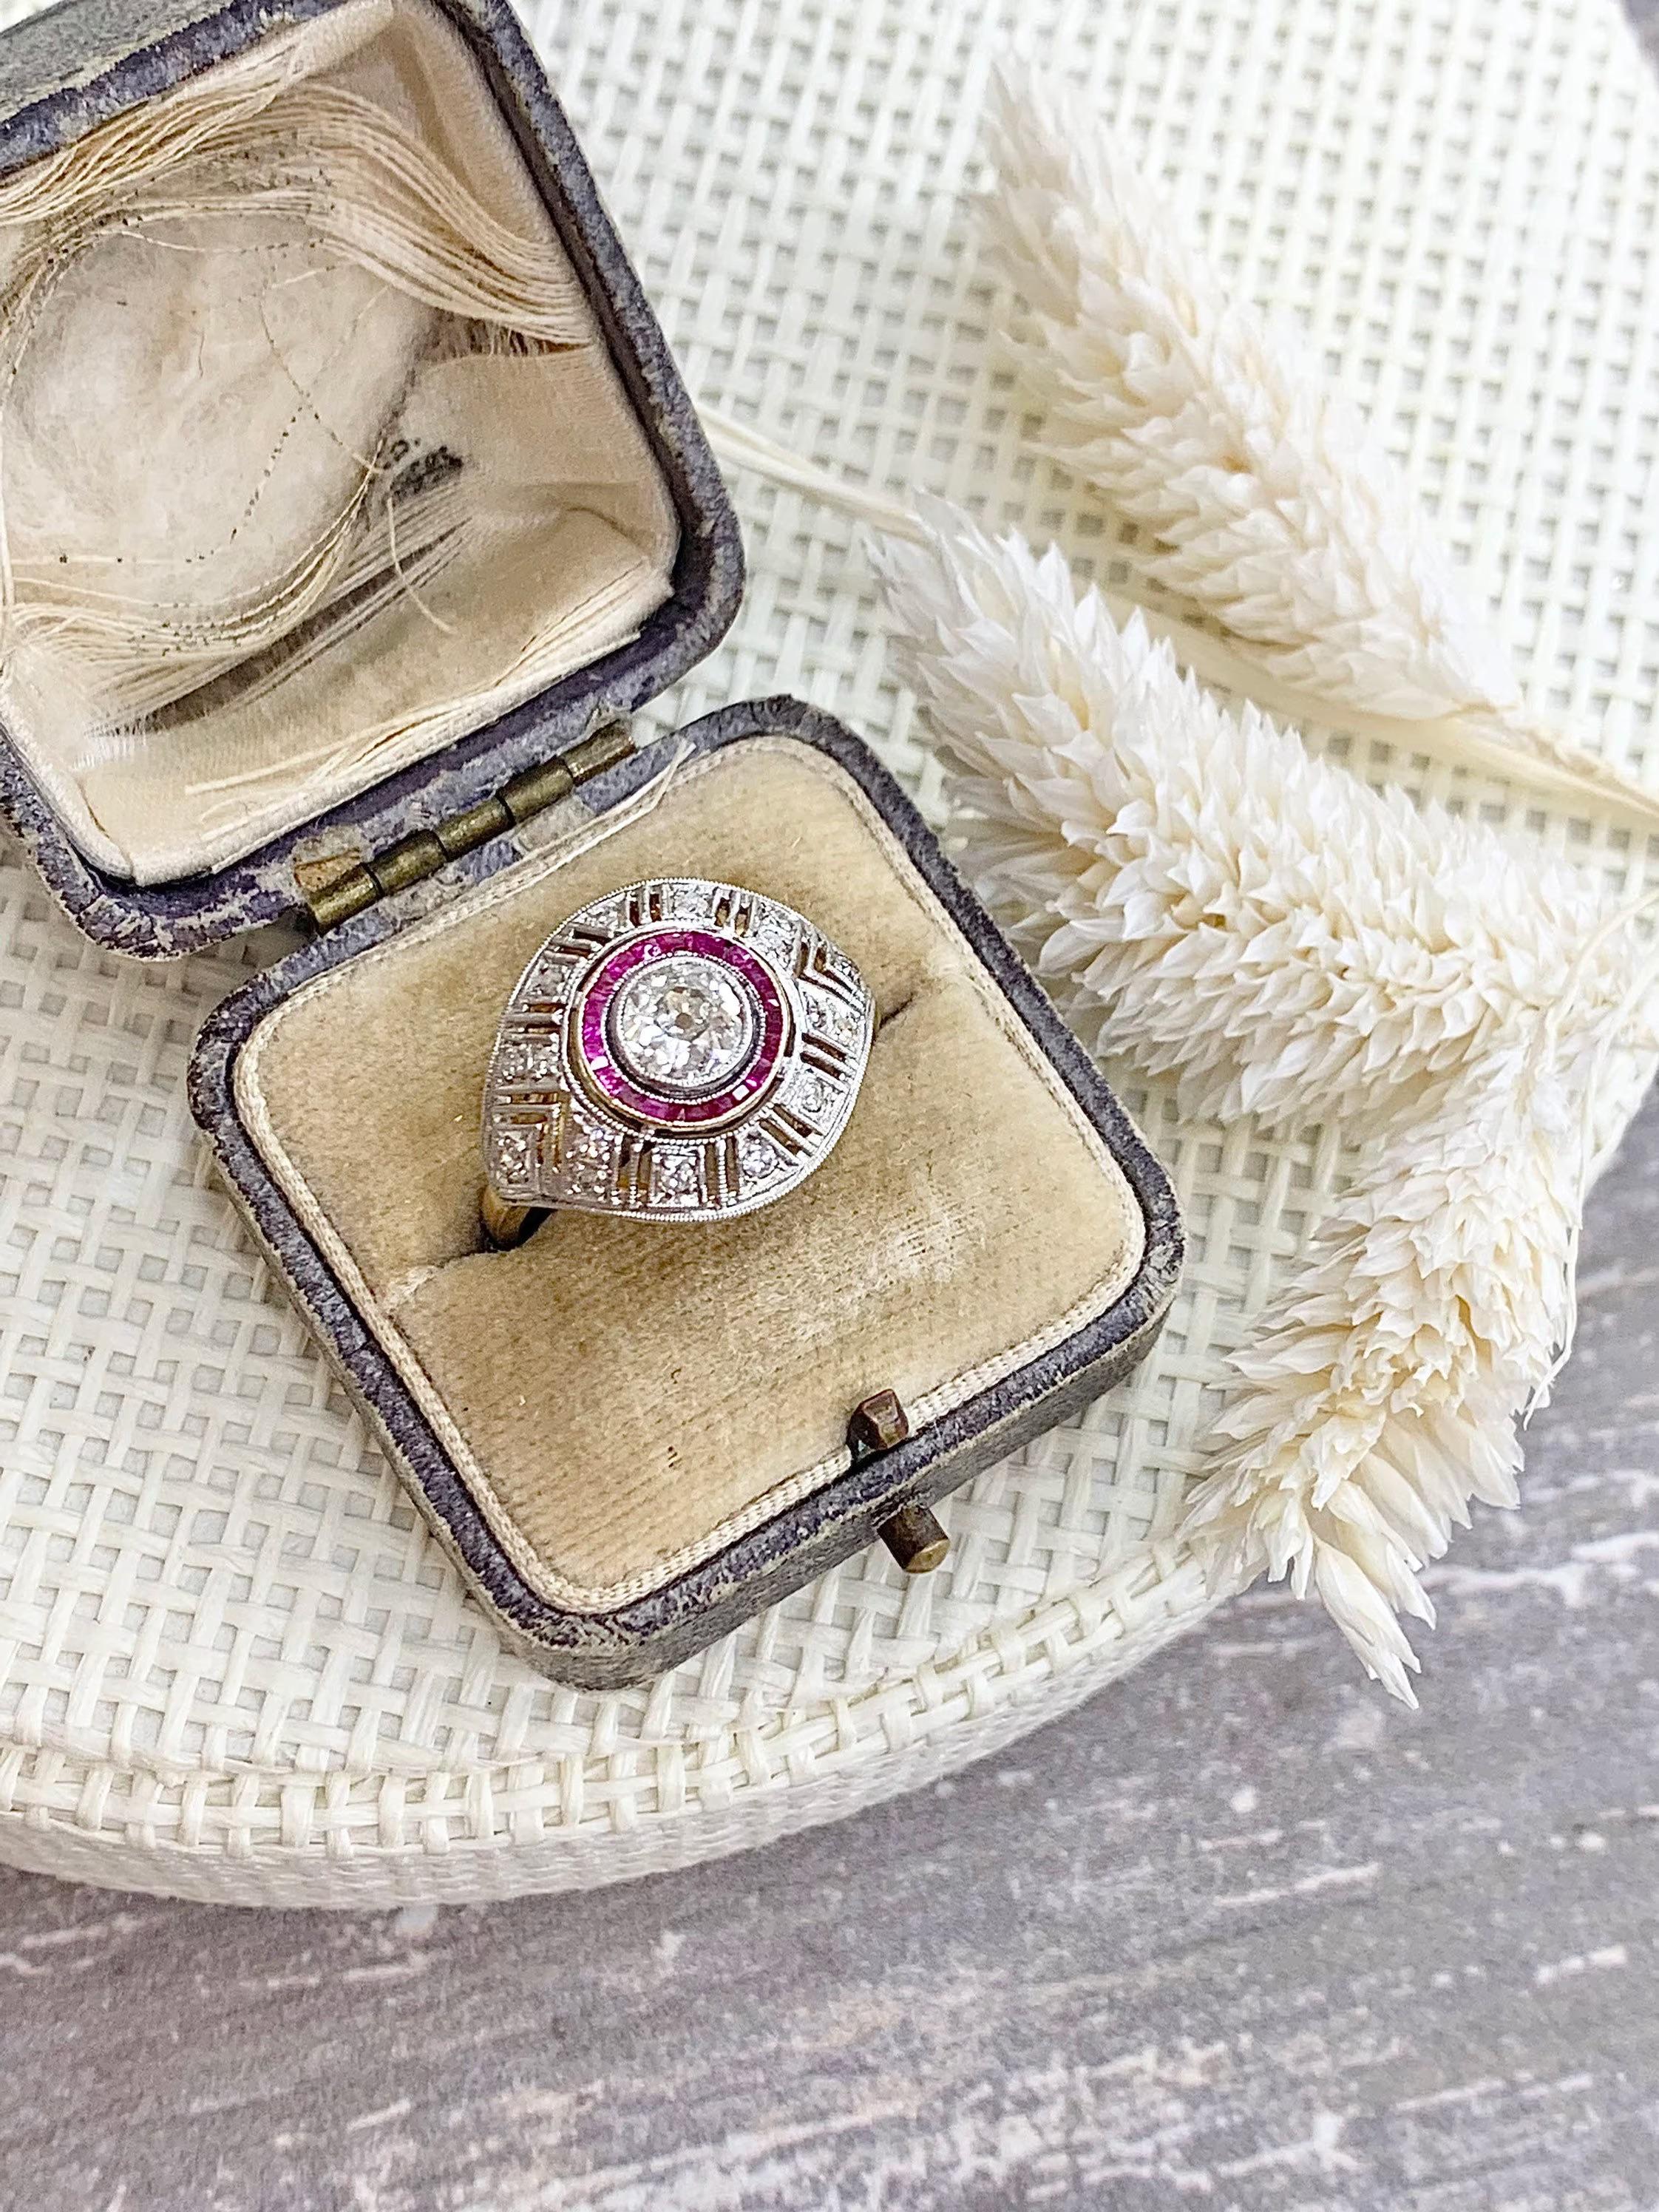 Art Deco Target Ring 

Circa 1920’s

18ct Yellow & White Gold

Set with a Beautiful, Old Brilliant Cut Centre Stone- Approx 0.75cts 
Surrounded in a Target Design of Calibrated Rubies. Complimented Beautifully with Old Cut Diamonds in a Bombe